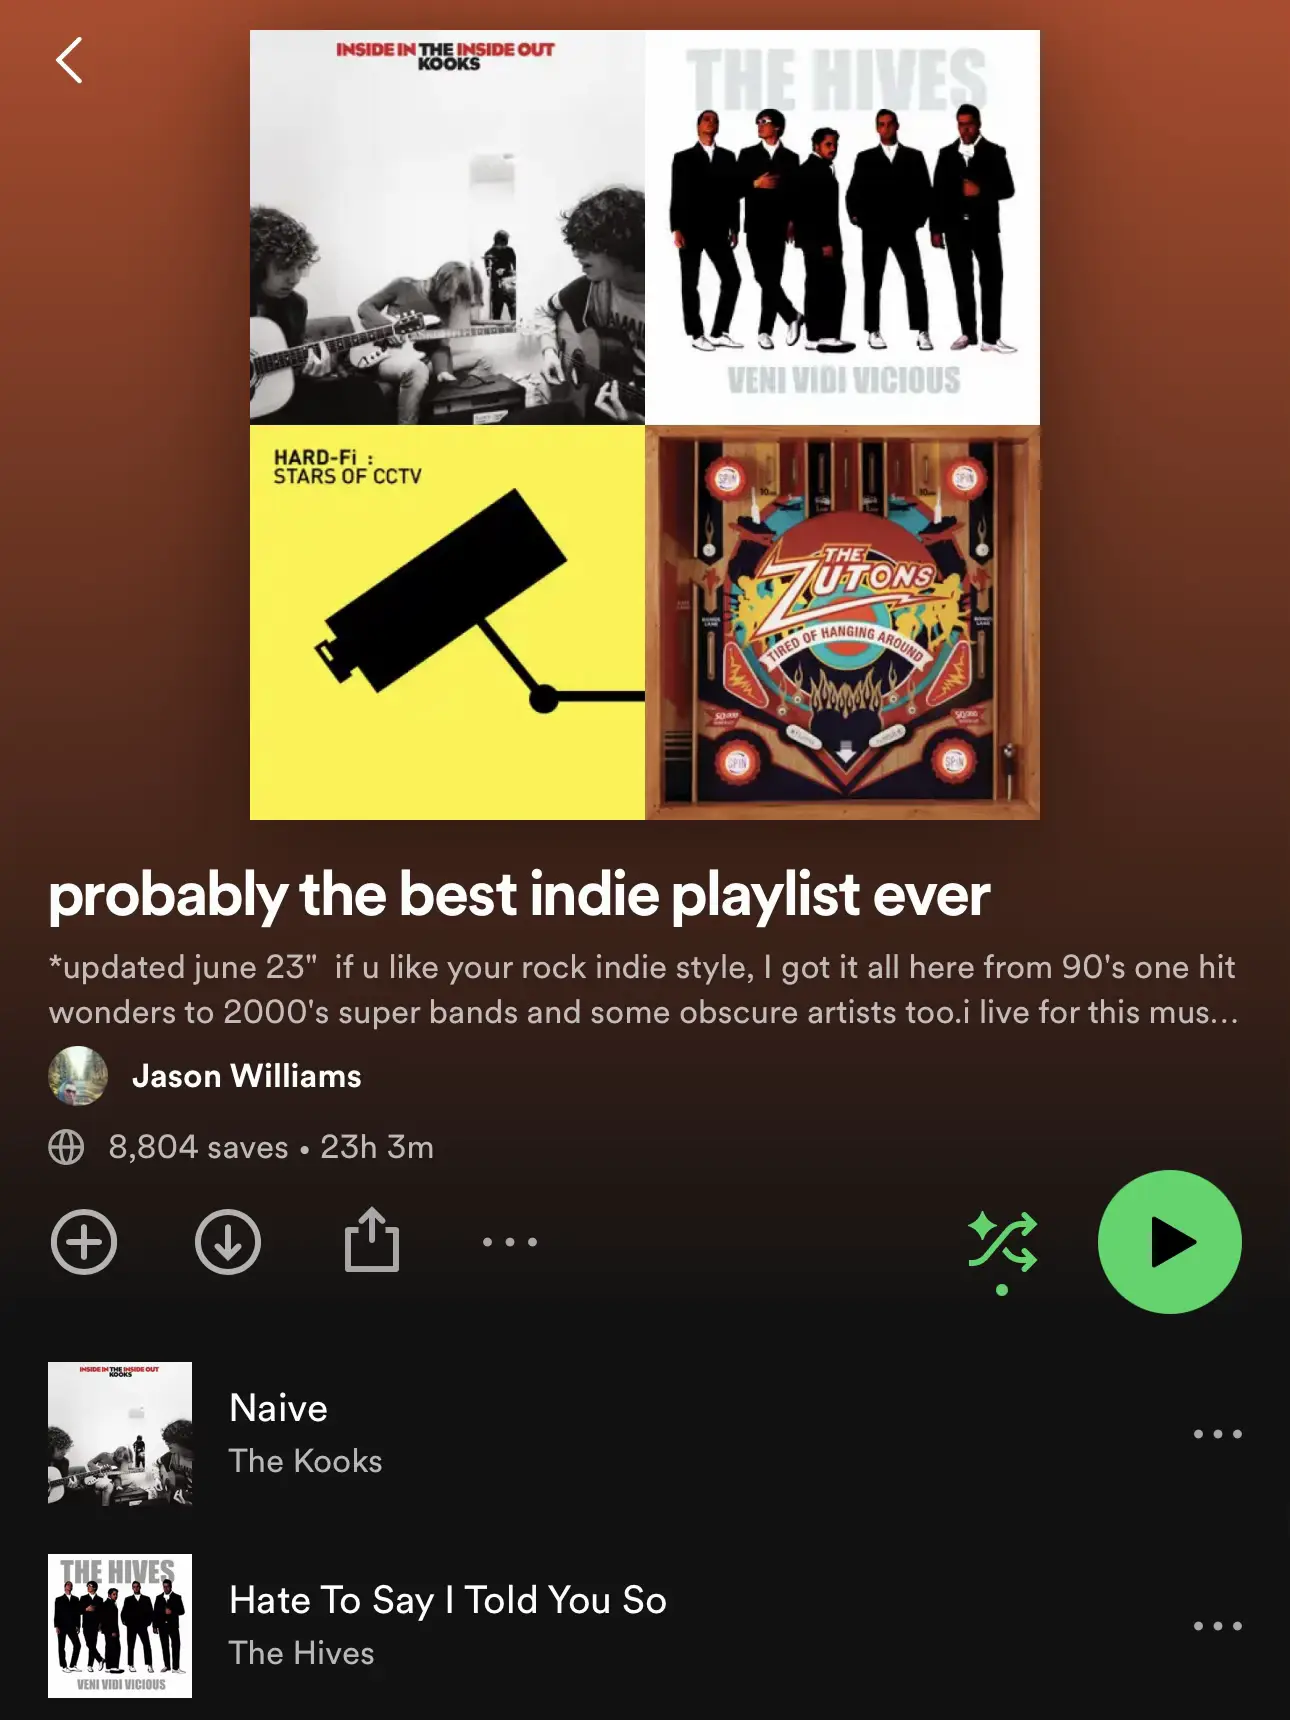  A playlist of music